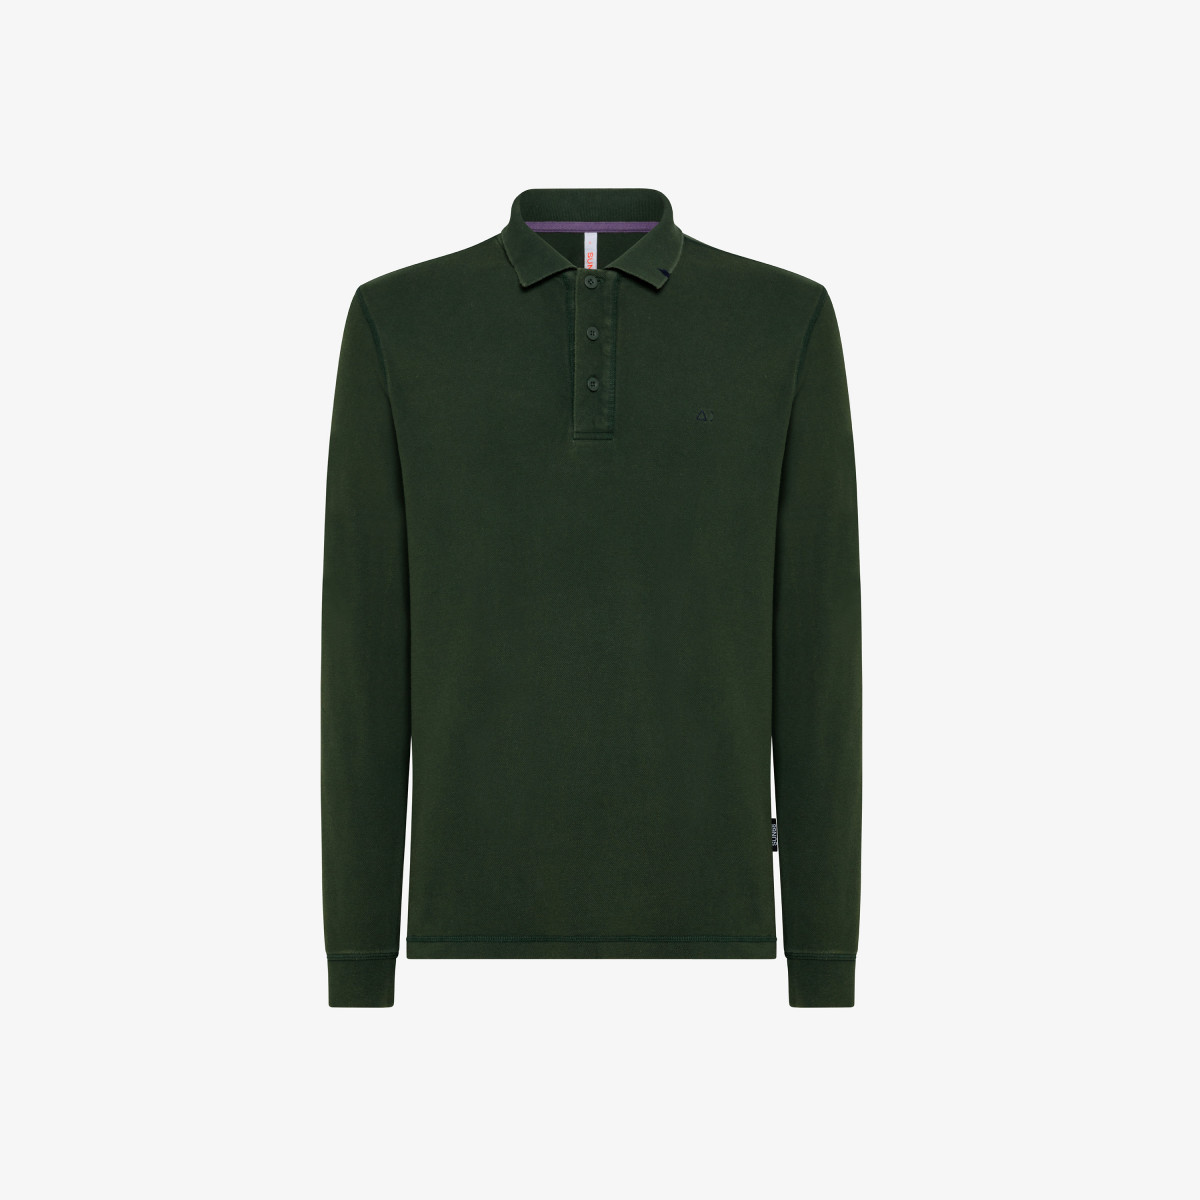 POLO VINTAGE CONTRAST STICHING L/S DARK MILITARY